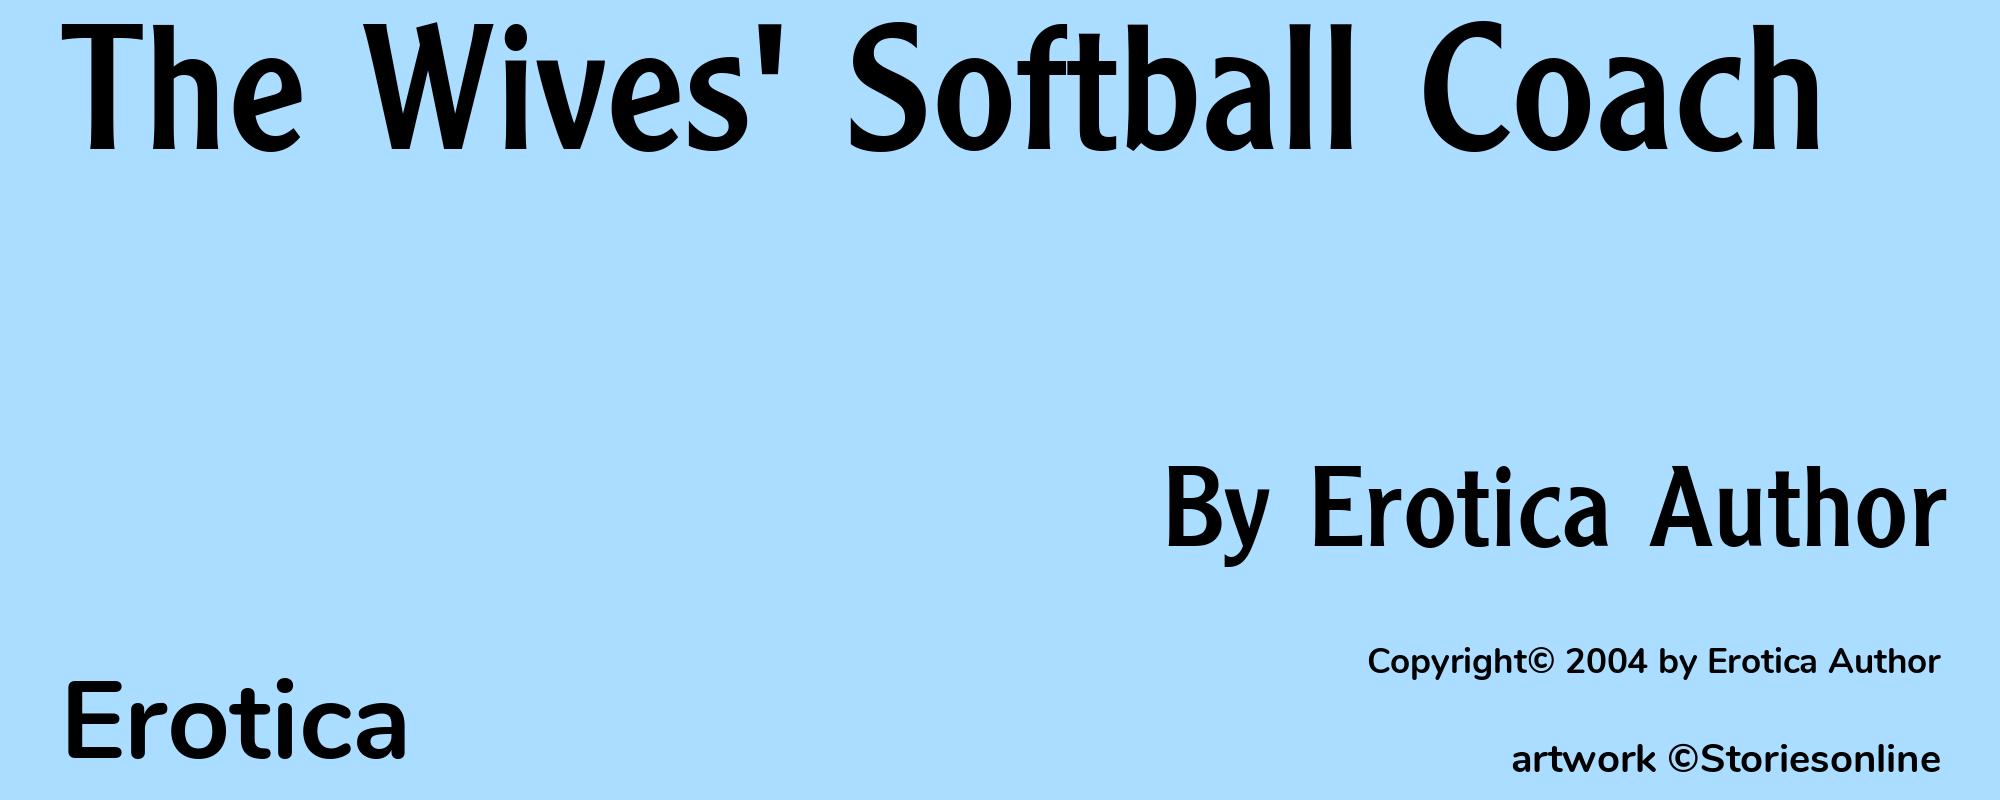 The Wives' Softball Coach - Cover